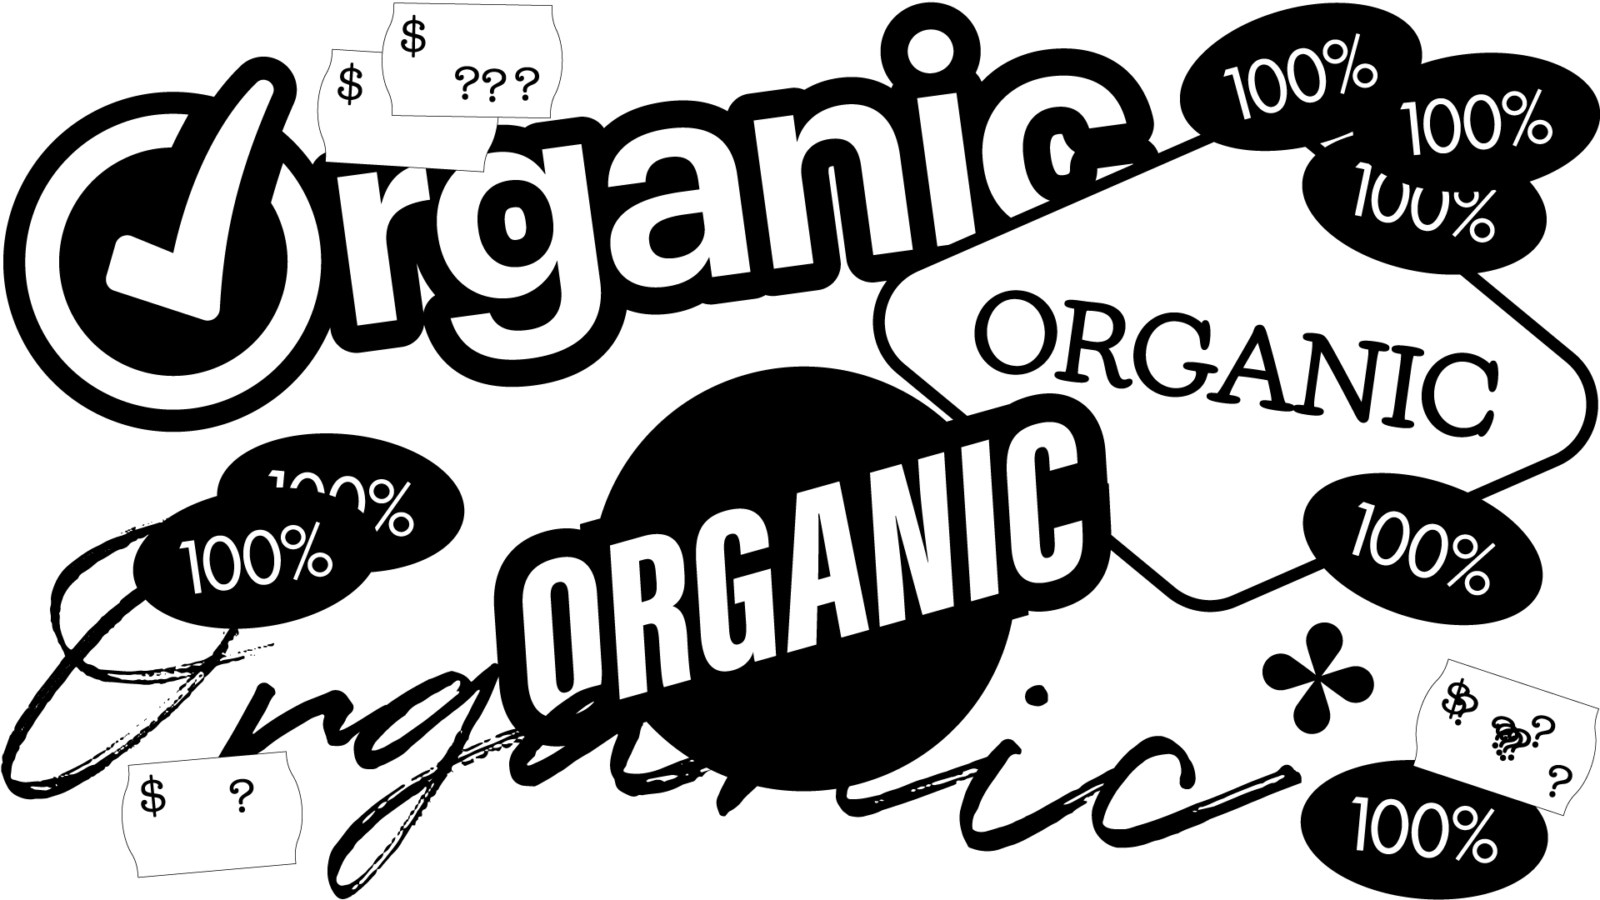 What Does it Mean to be Organic?